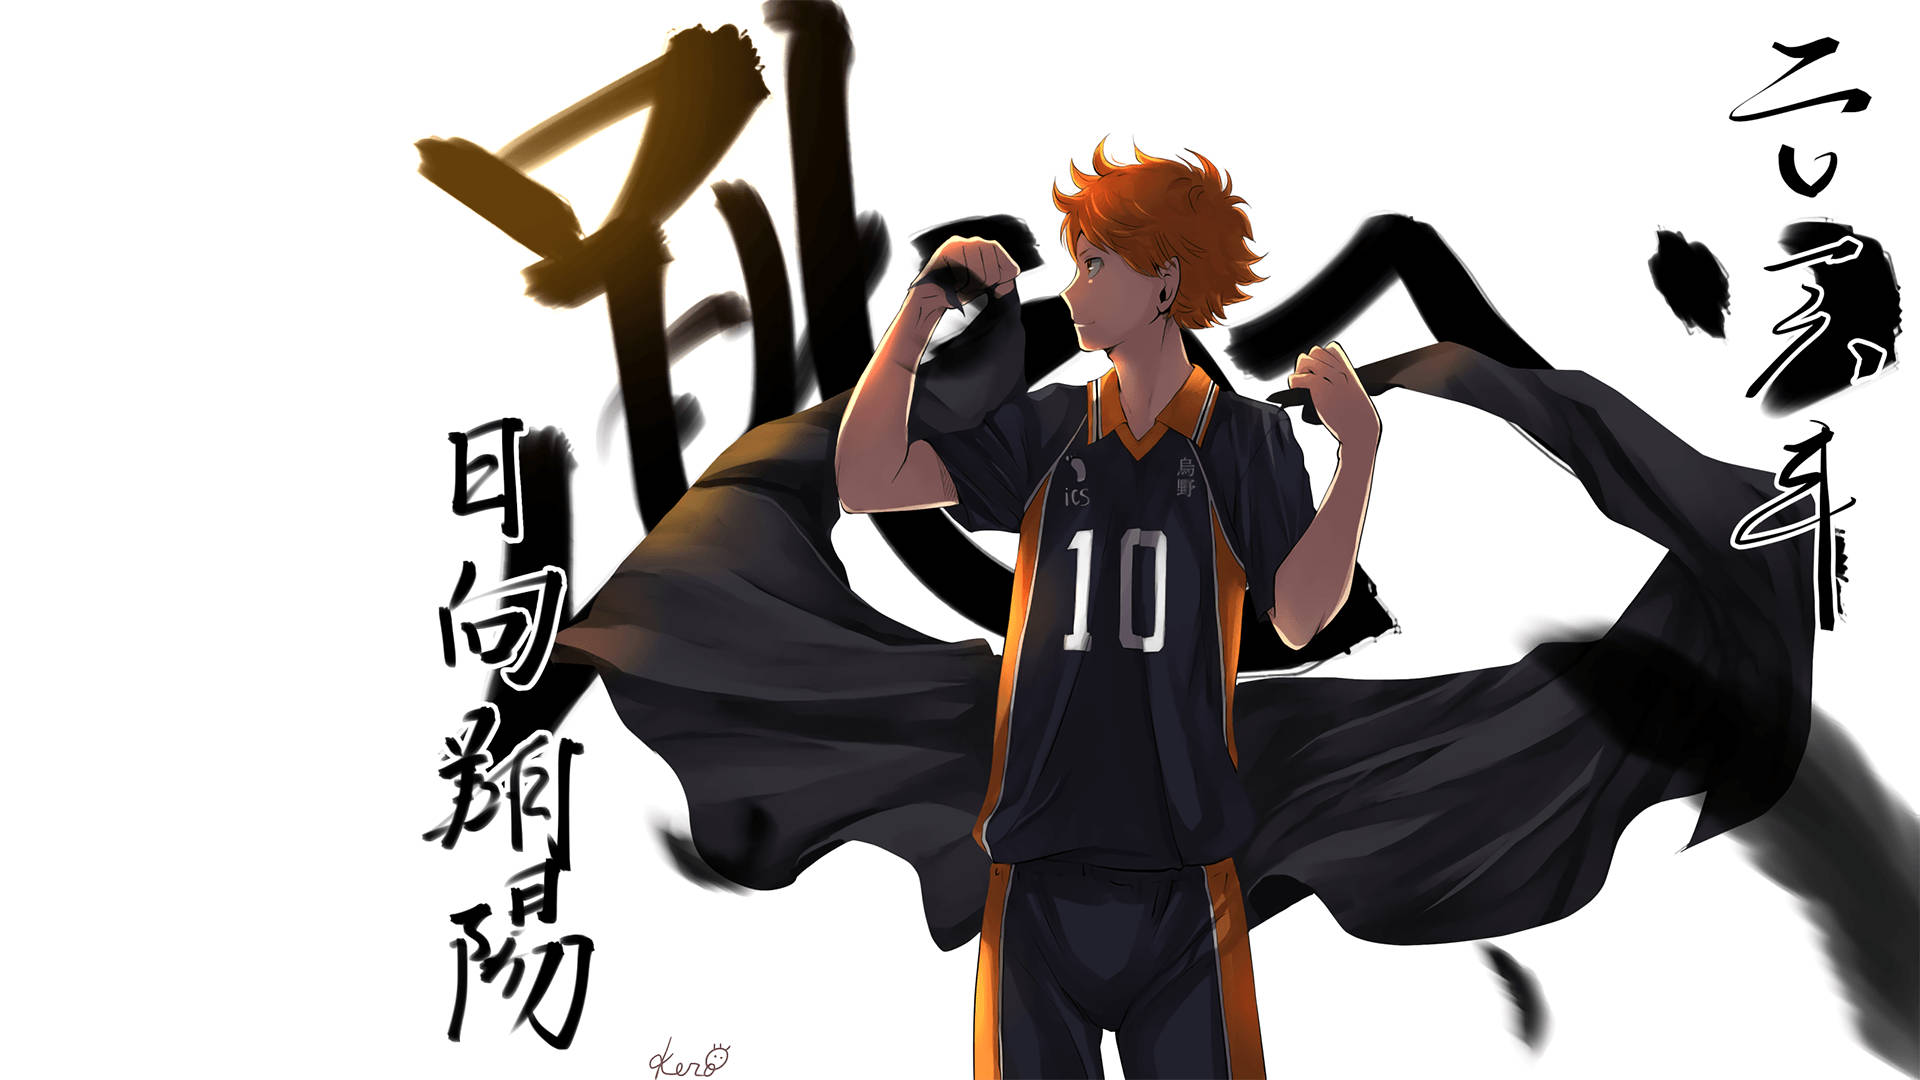 Hinata Shouyou Unleashes An Impressive Attack At The Game Of Volleyball.